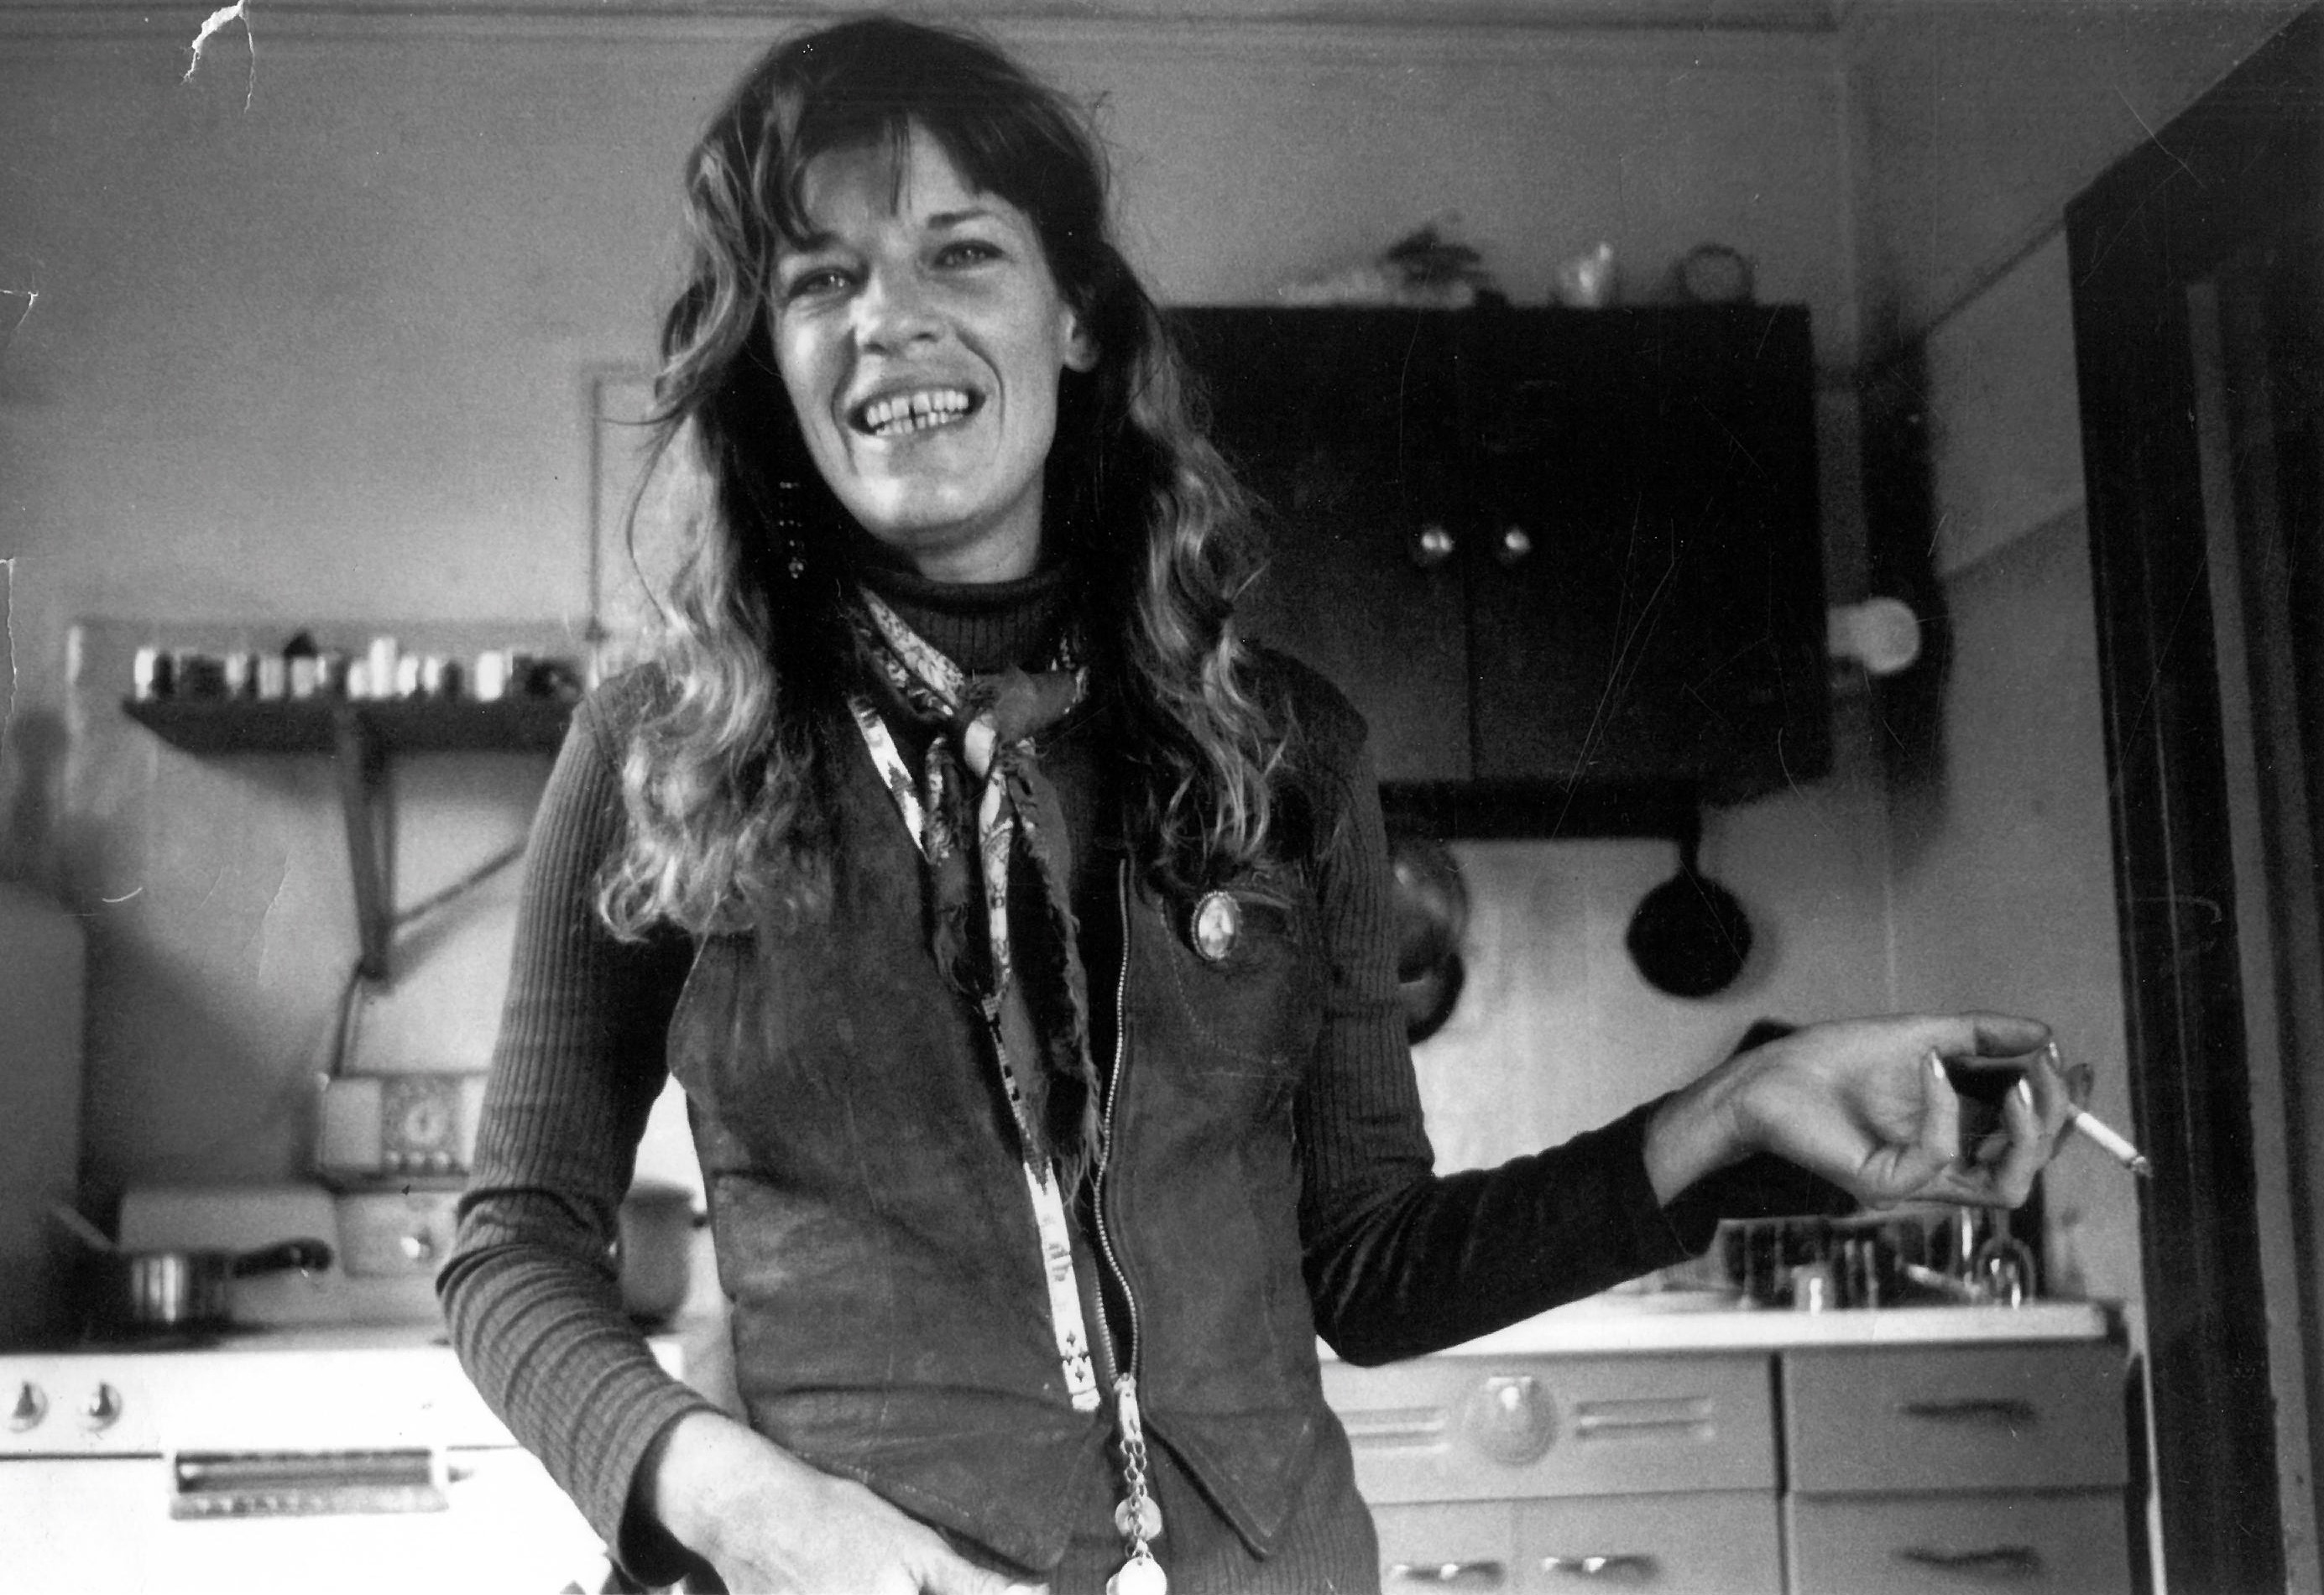 Marjorie Sharp, Portland poet and notorious wild woman in 1970s, tried to make life an art form photo